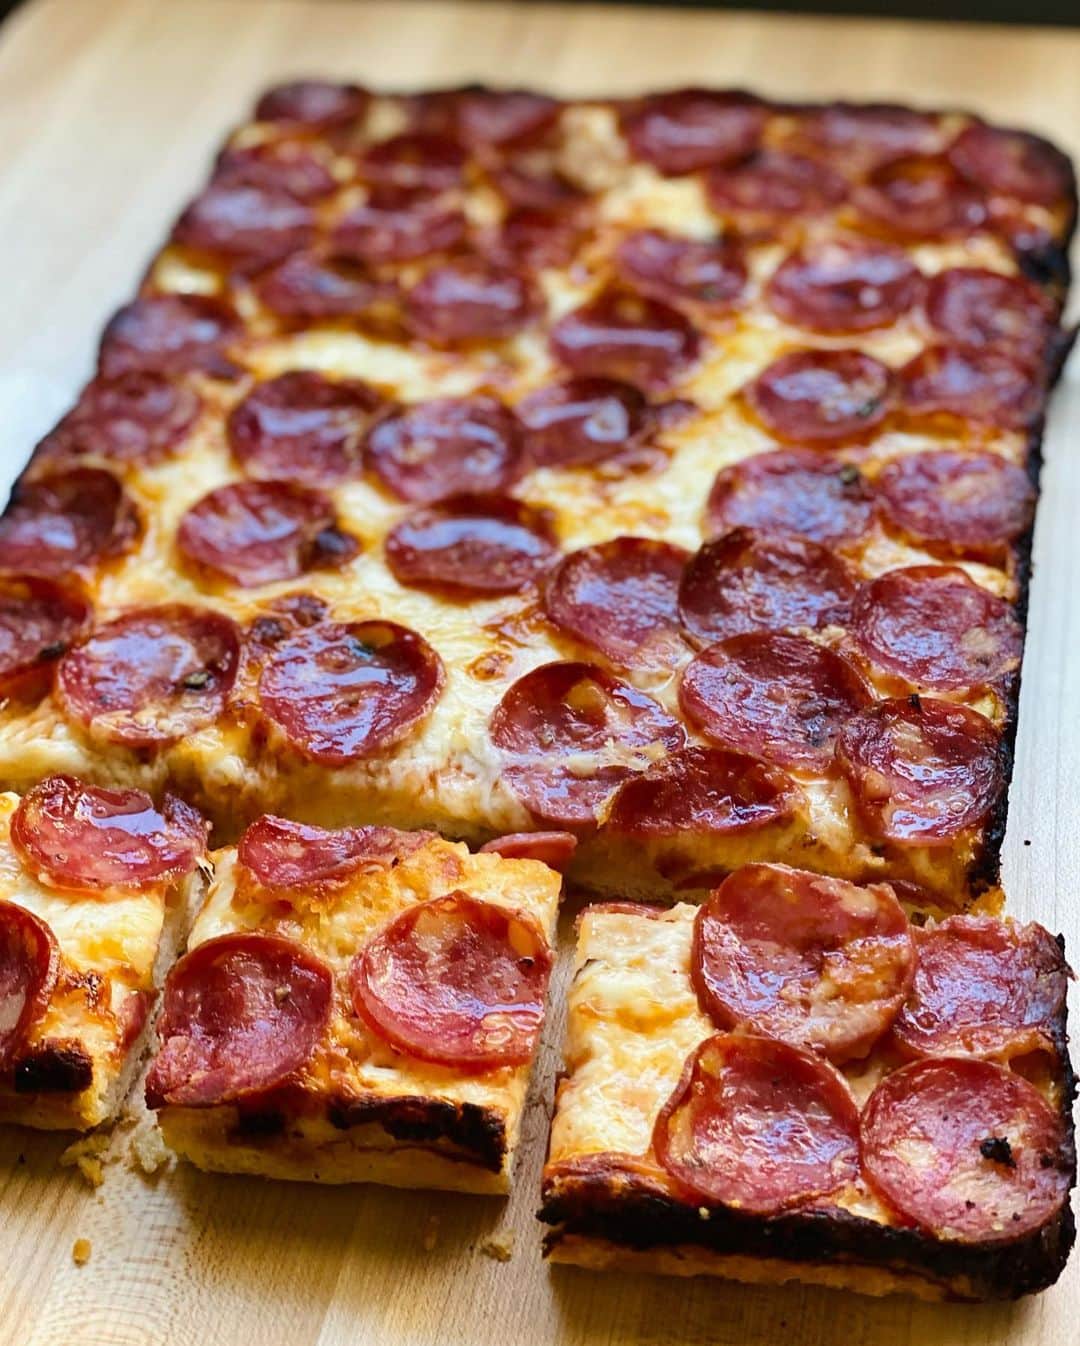 Antonietteのインスタグラム：「It’s Sunday around here, or more fitting….’ZAnday! Enjoying this restful day by making Detroit style pizza. My fave style with its’ yeasty, soft interior yet slightly crunchy edged square slices. 😋⬜️🍕」